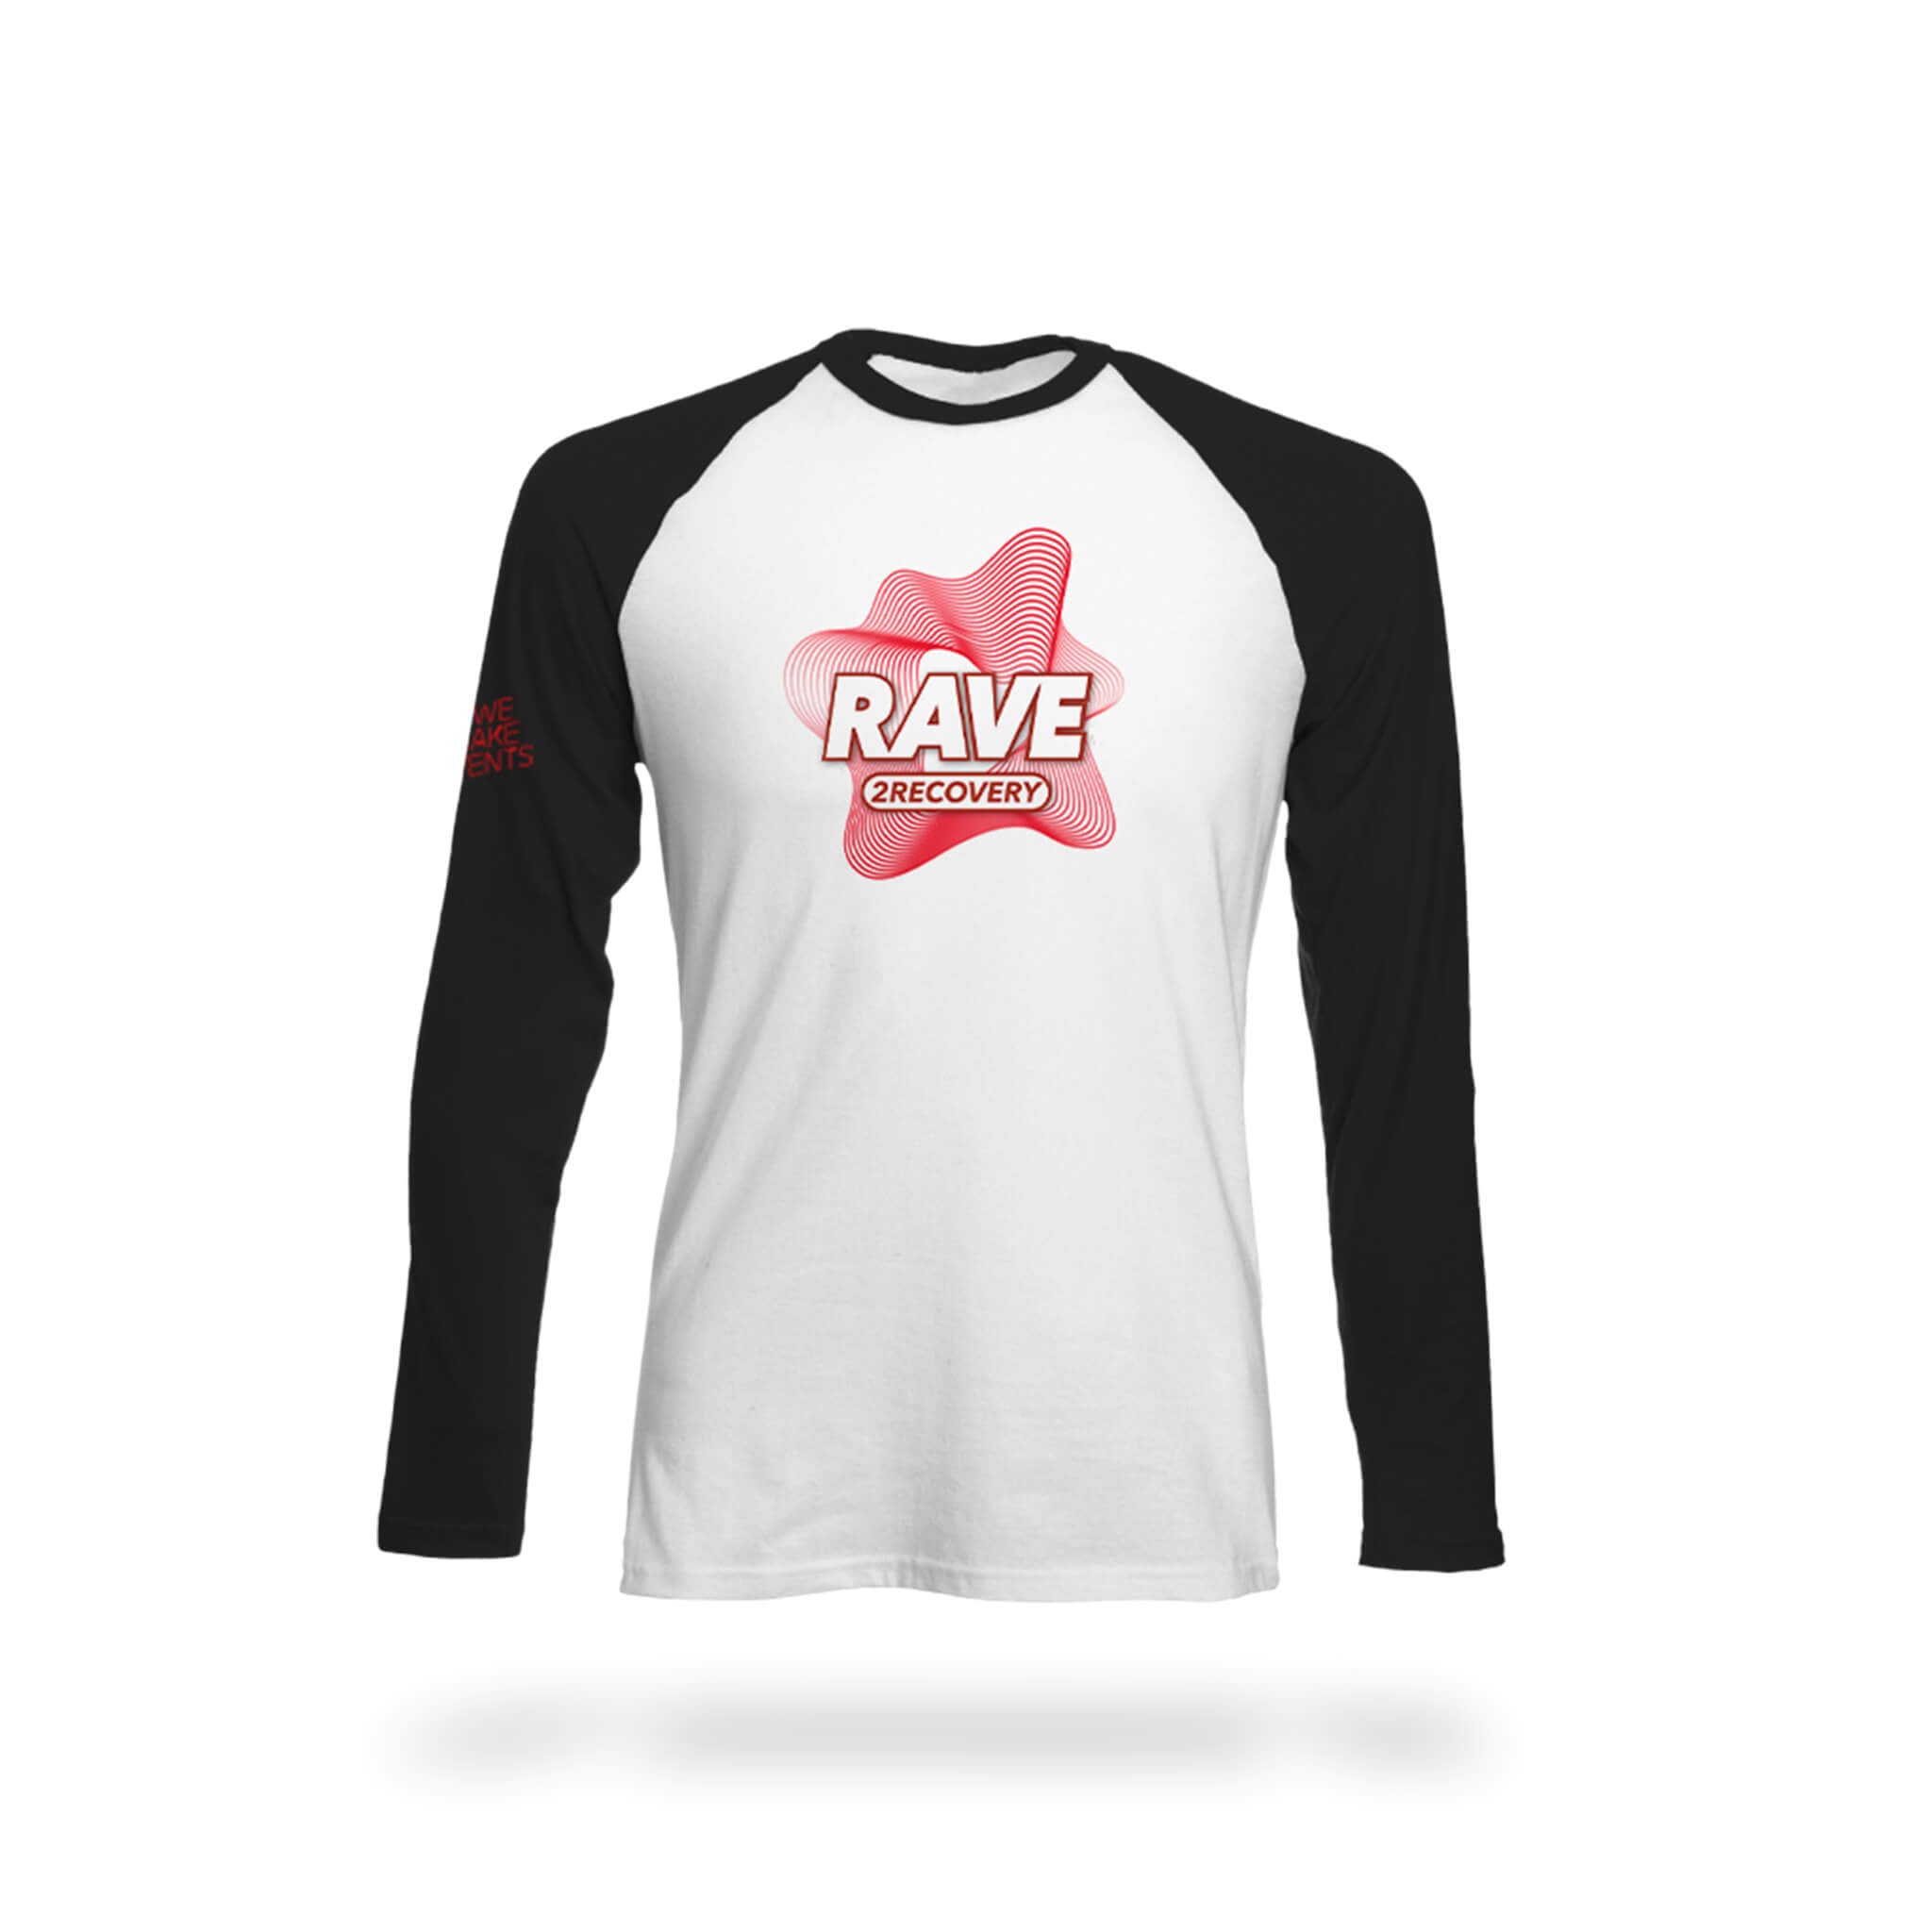 Rave 2 Recovery Logo Baseball T-Shirt We Make Events Store